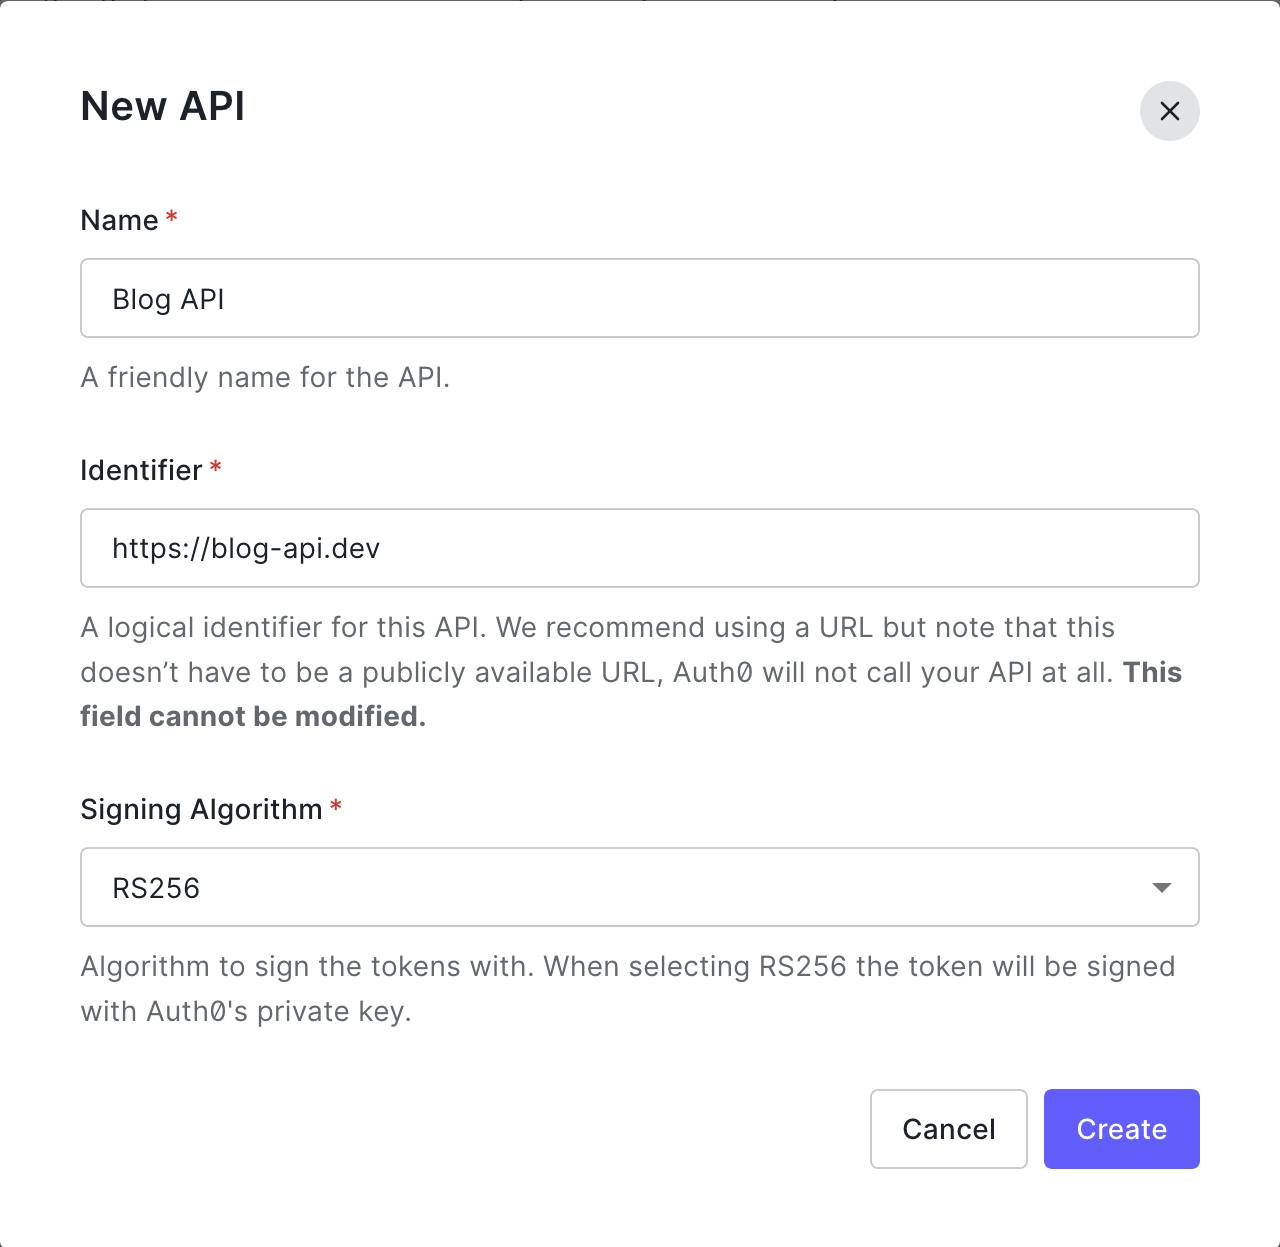 Screenshot of the New API form on Auth0